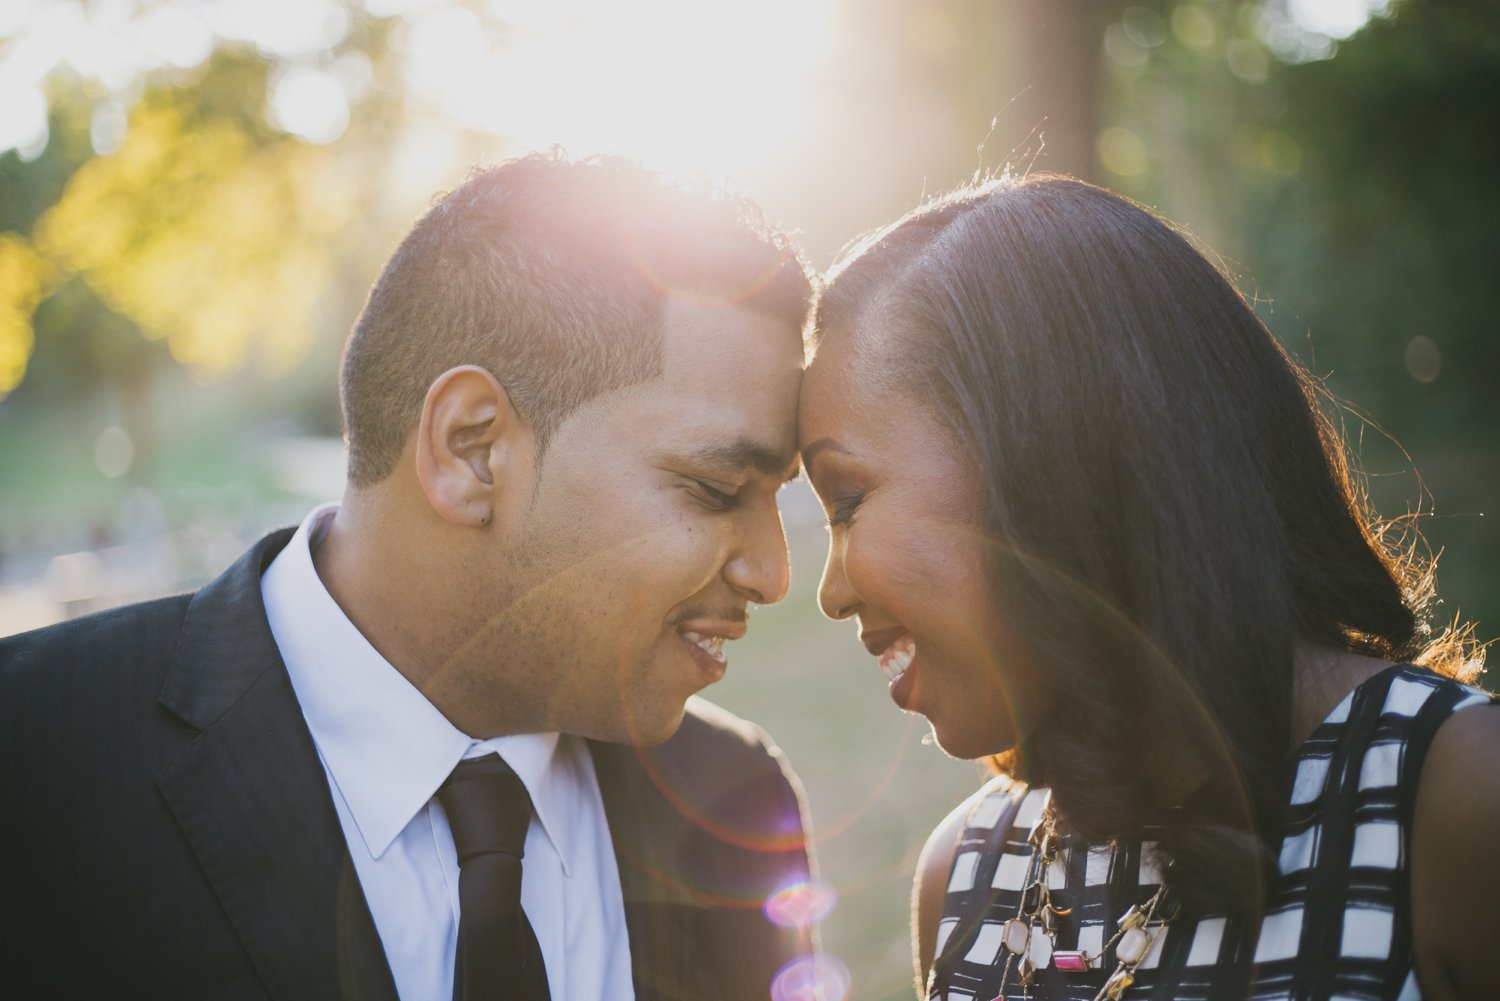 89NYC-NJ-ENGAGEMENT-PHOTOGRAPHY-BY-INTOTHESTORY-MOO-JAE.JPG